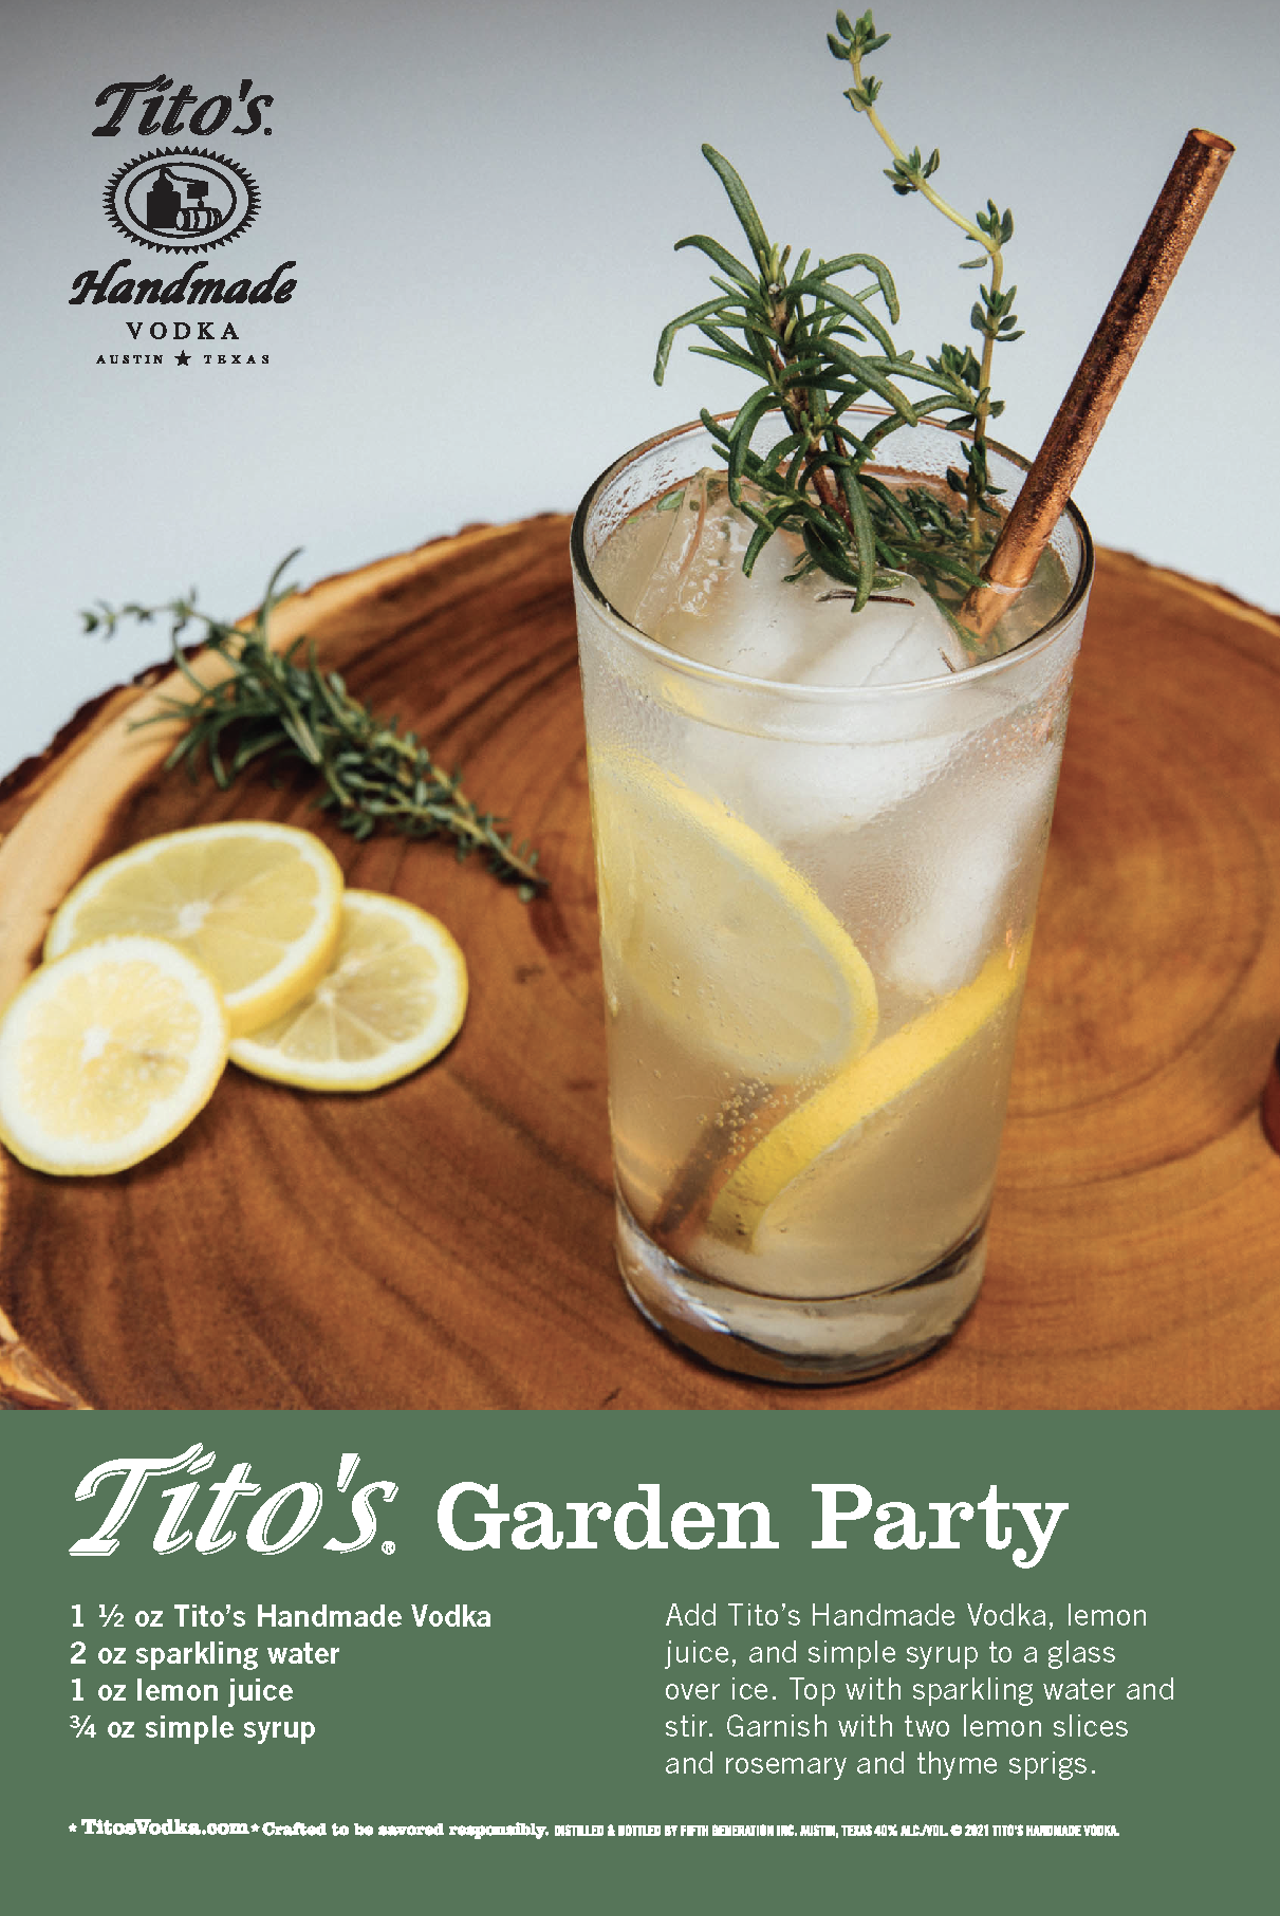 Garden Party
Try more Tito's Handmade Vodka cocktails here!